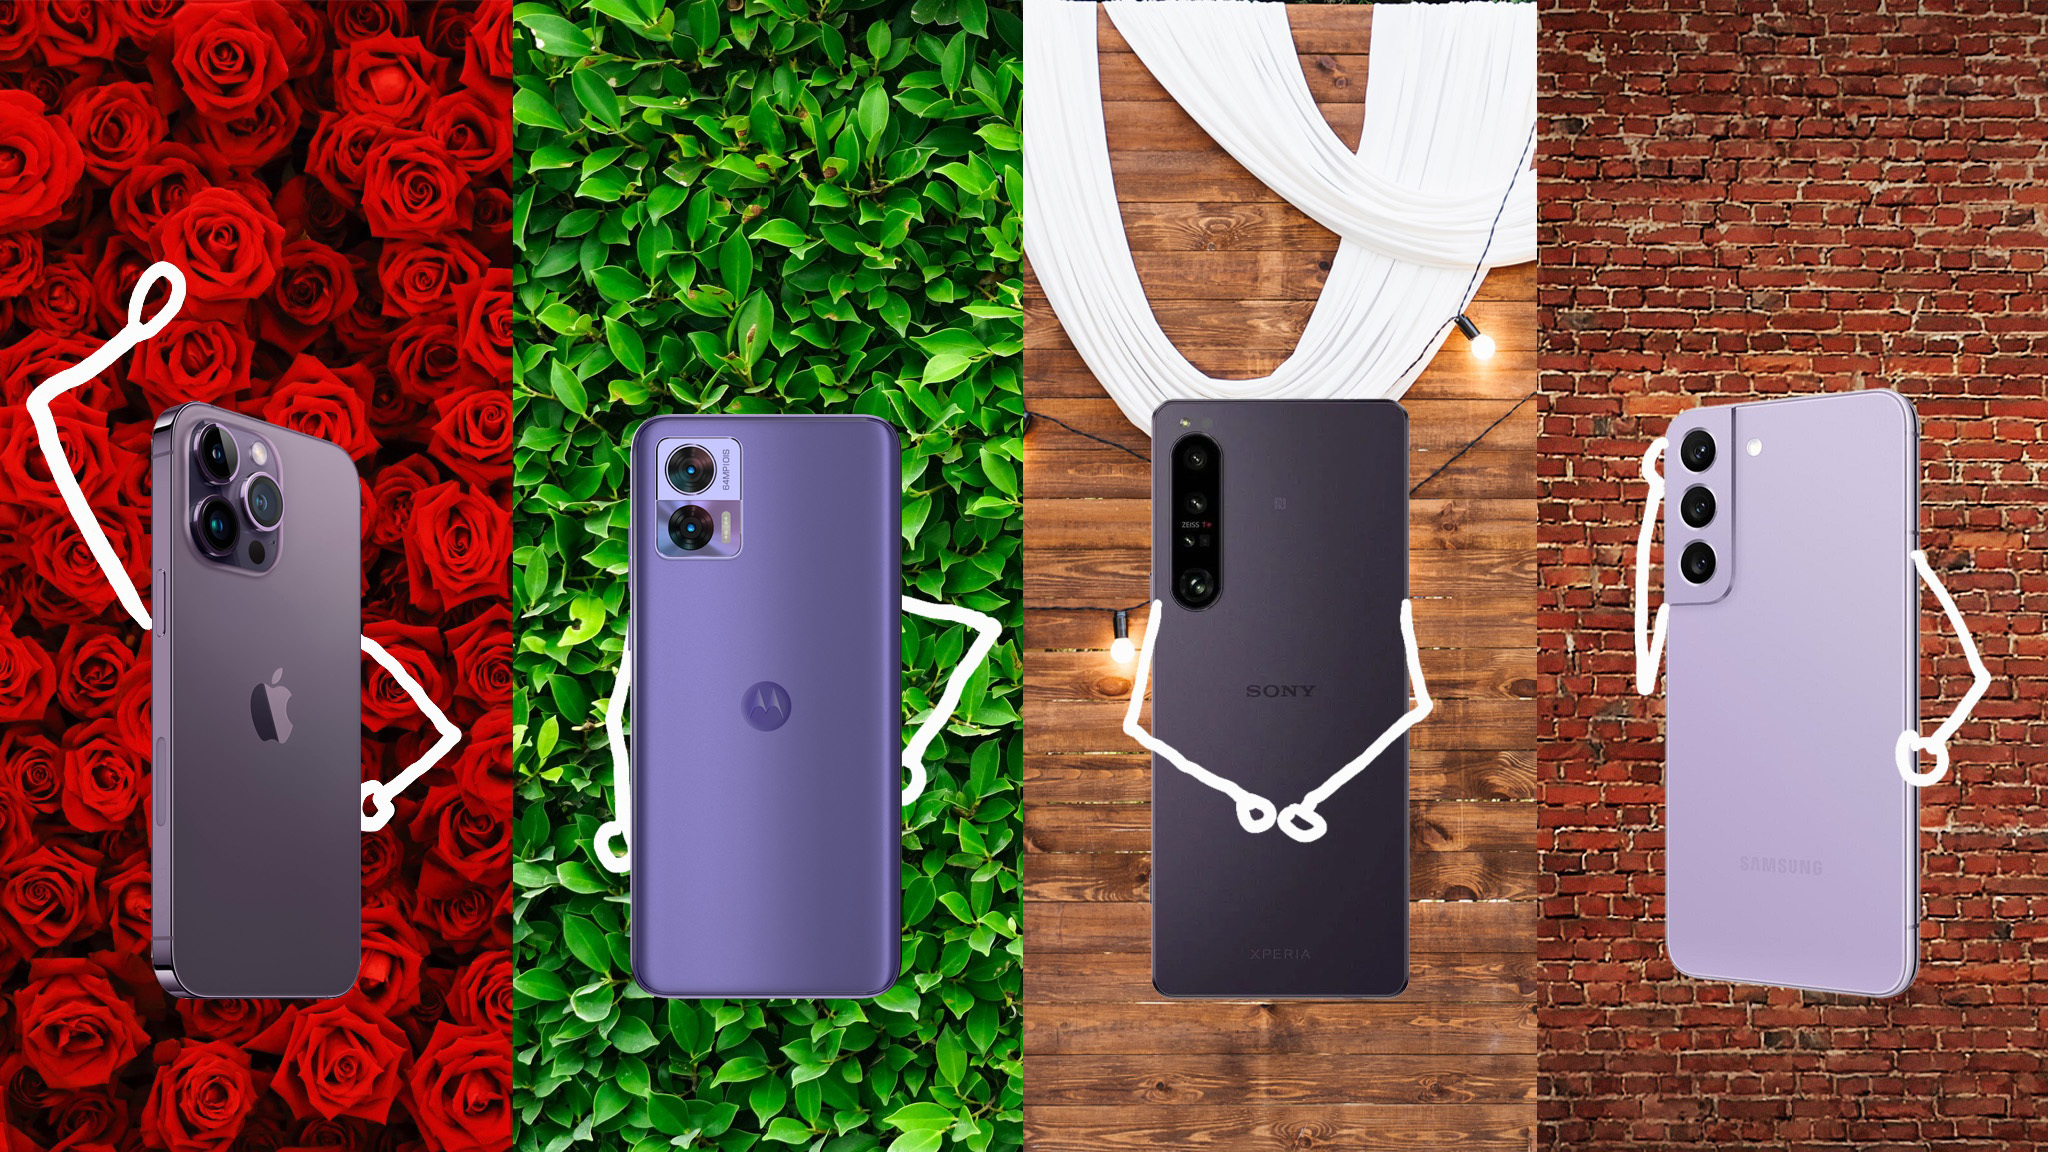 The iPhone 14 Pro, Motorola Edge 30 Neo, Sony Xperia 1 IV, and Samsung Galaxy S22 in pruple